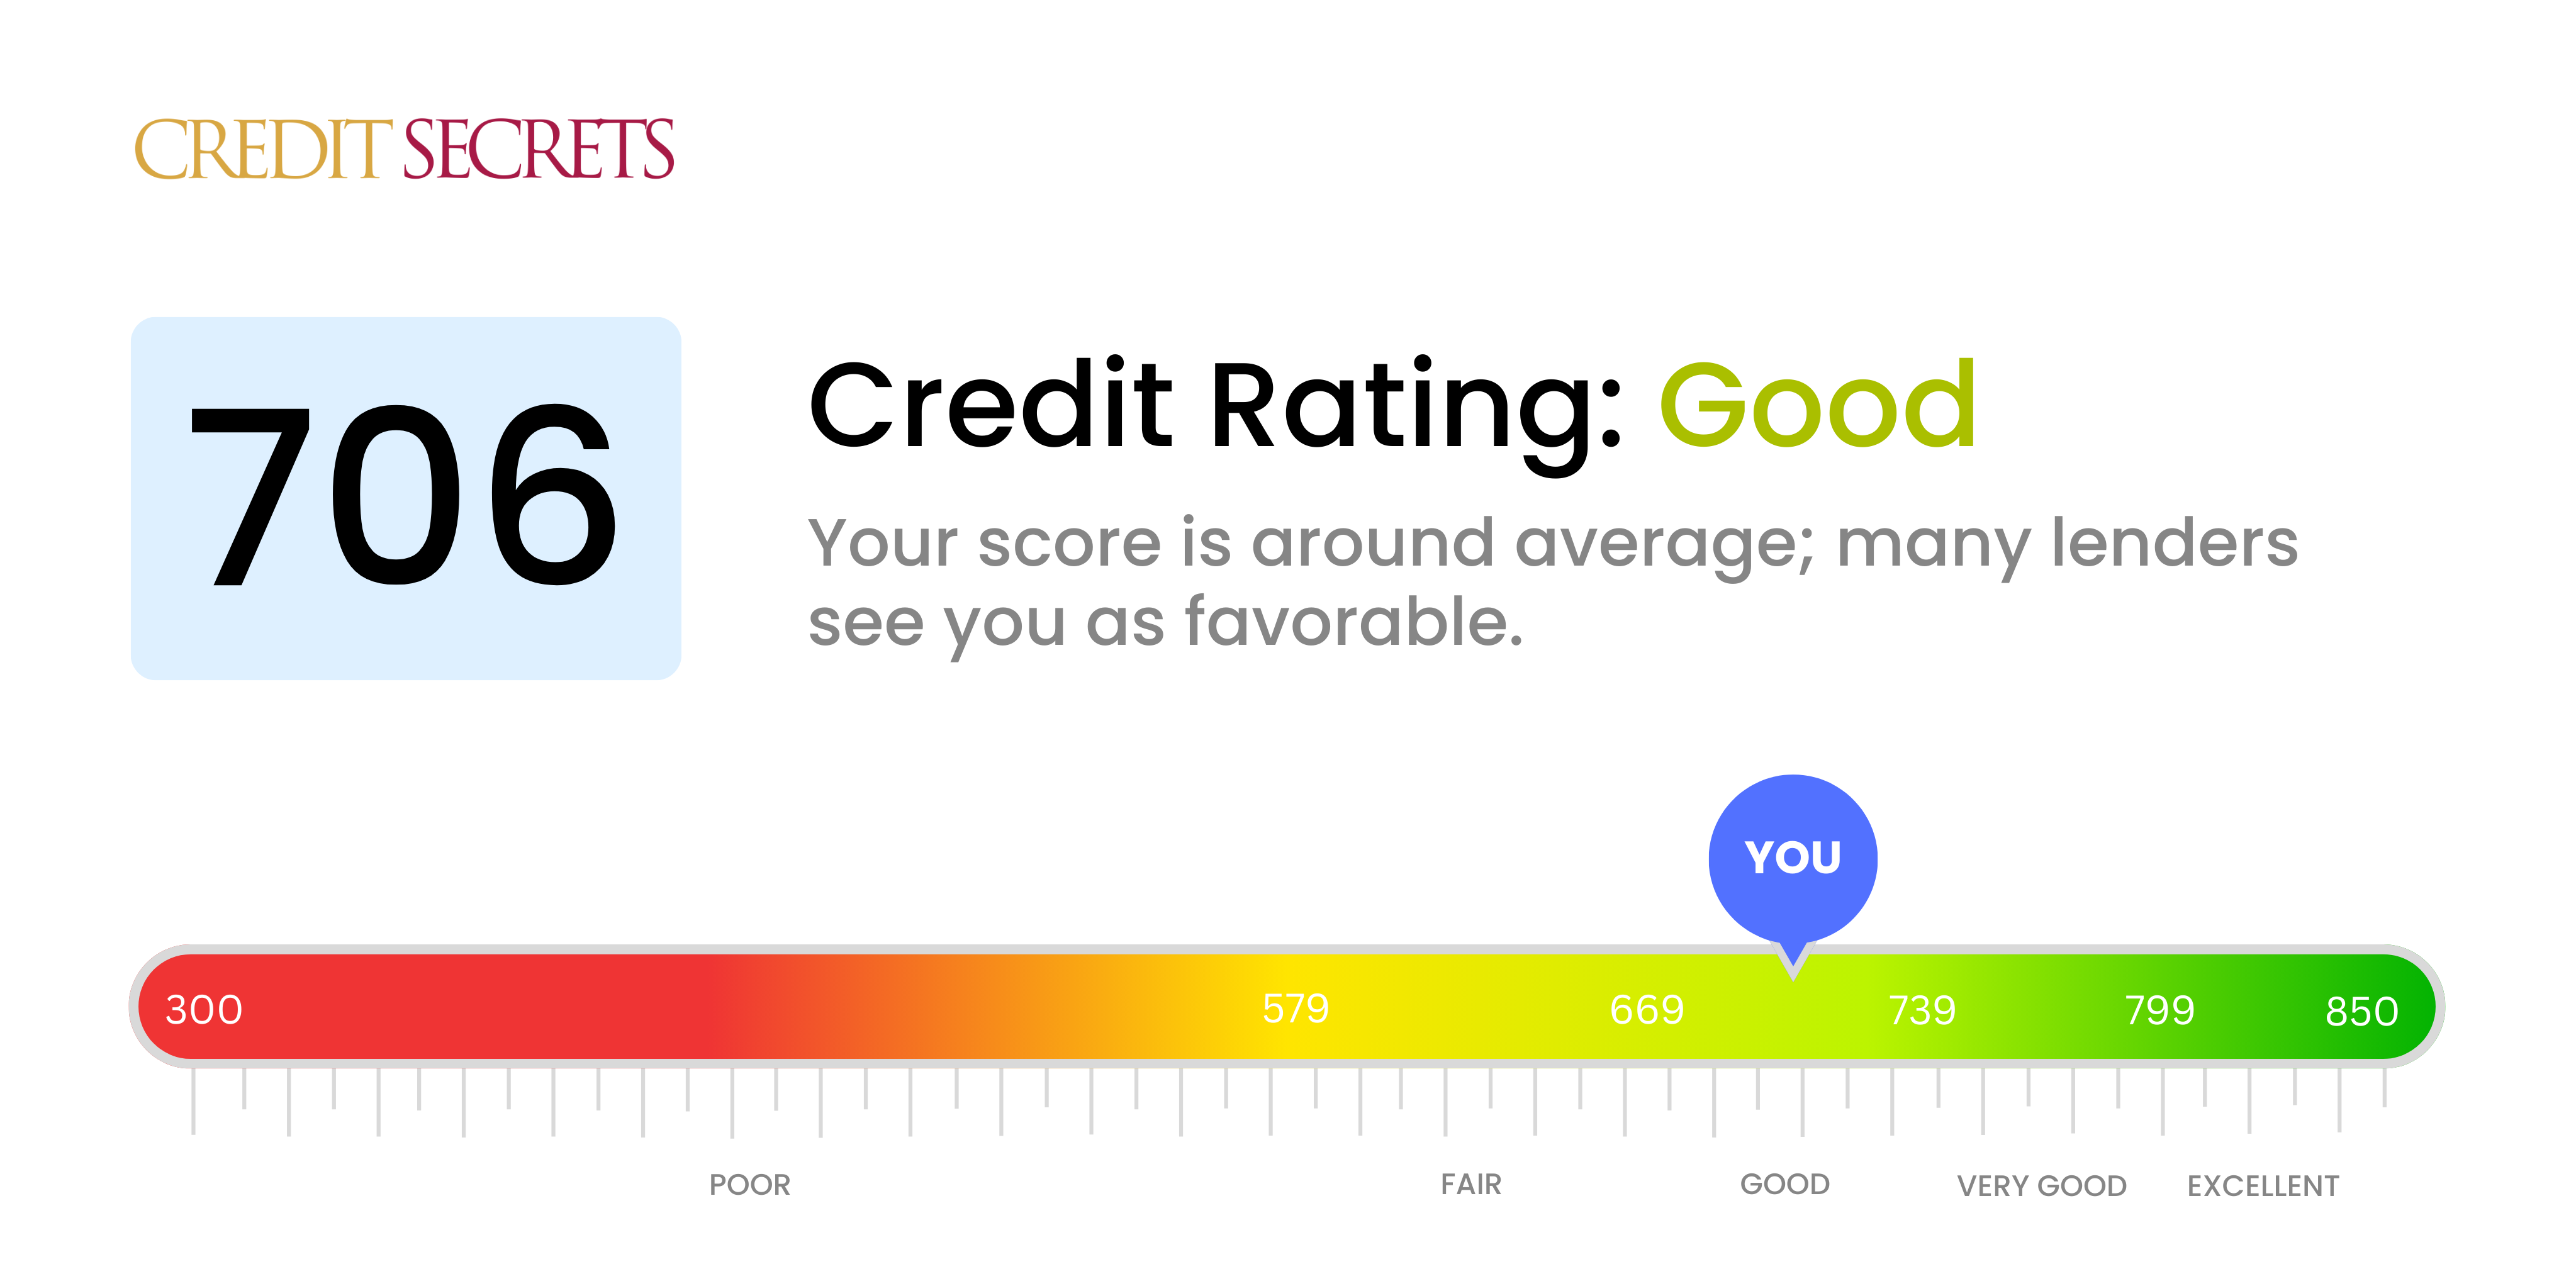 Is 706 a good credit score?